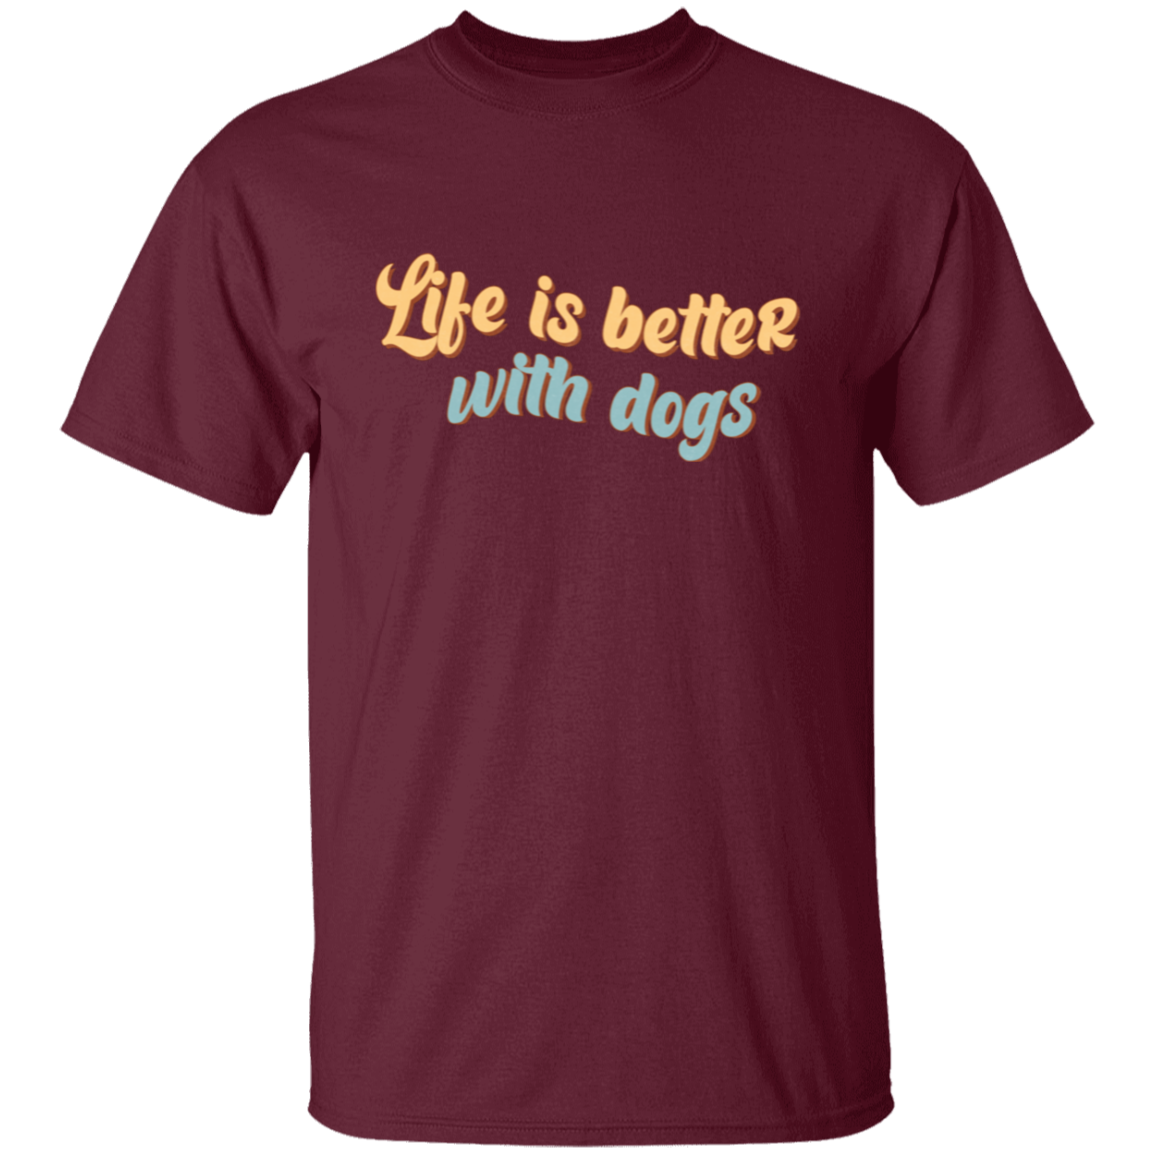 Life is Better with Dogs T-Shirt